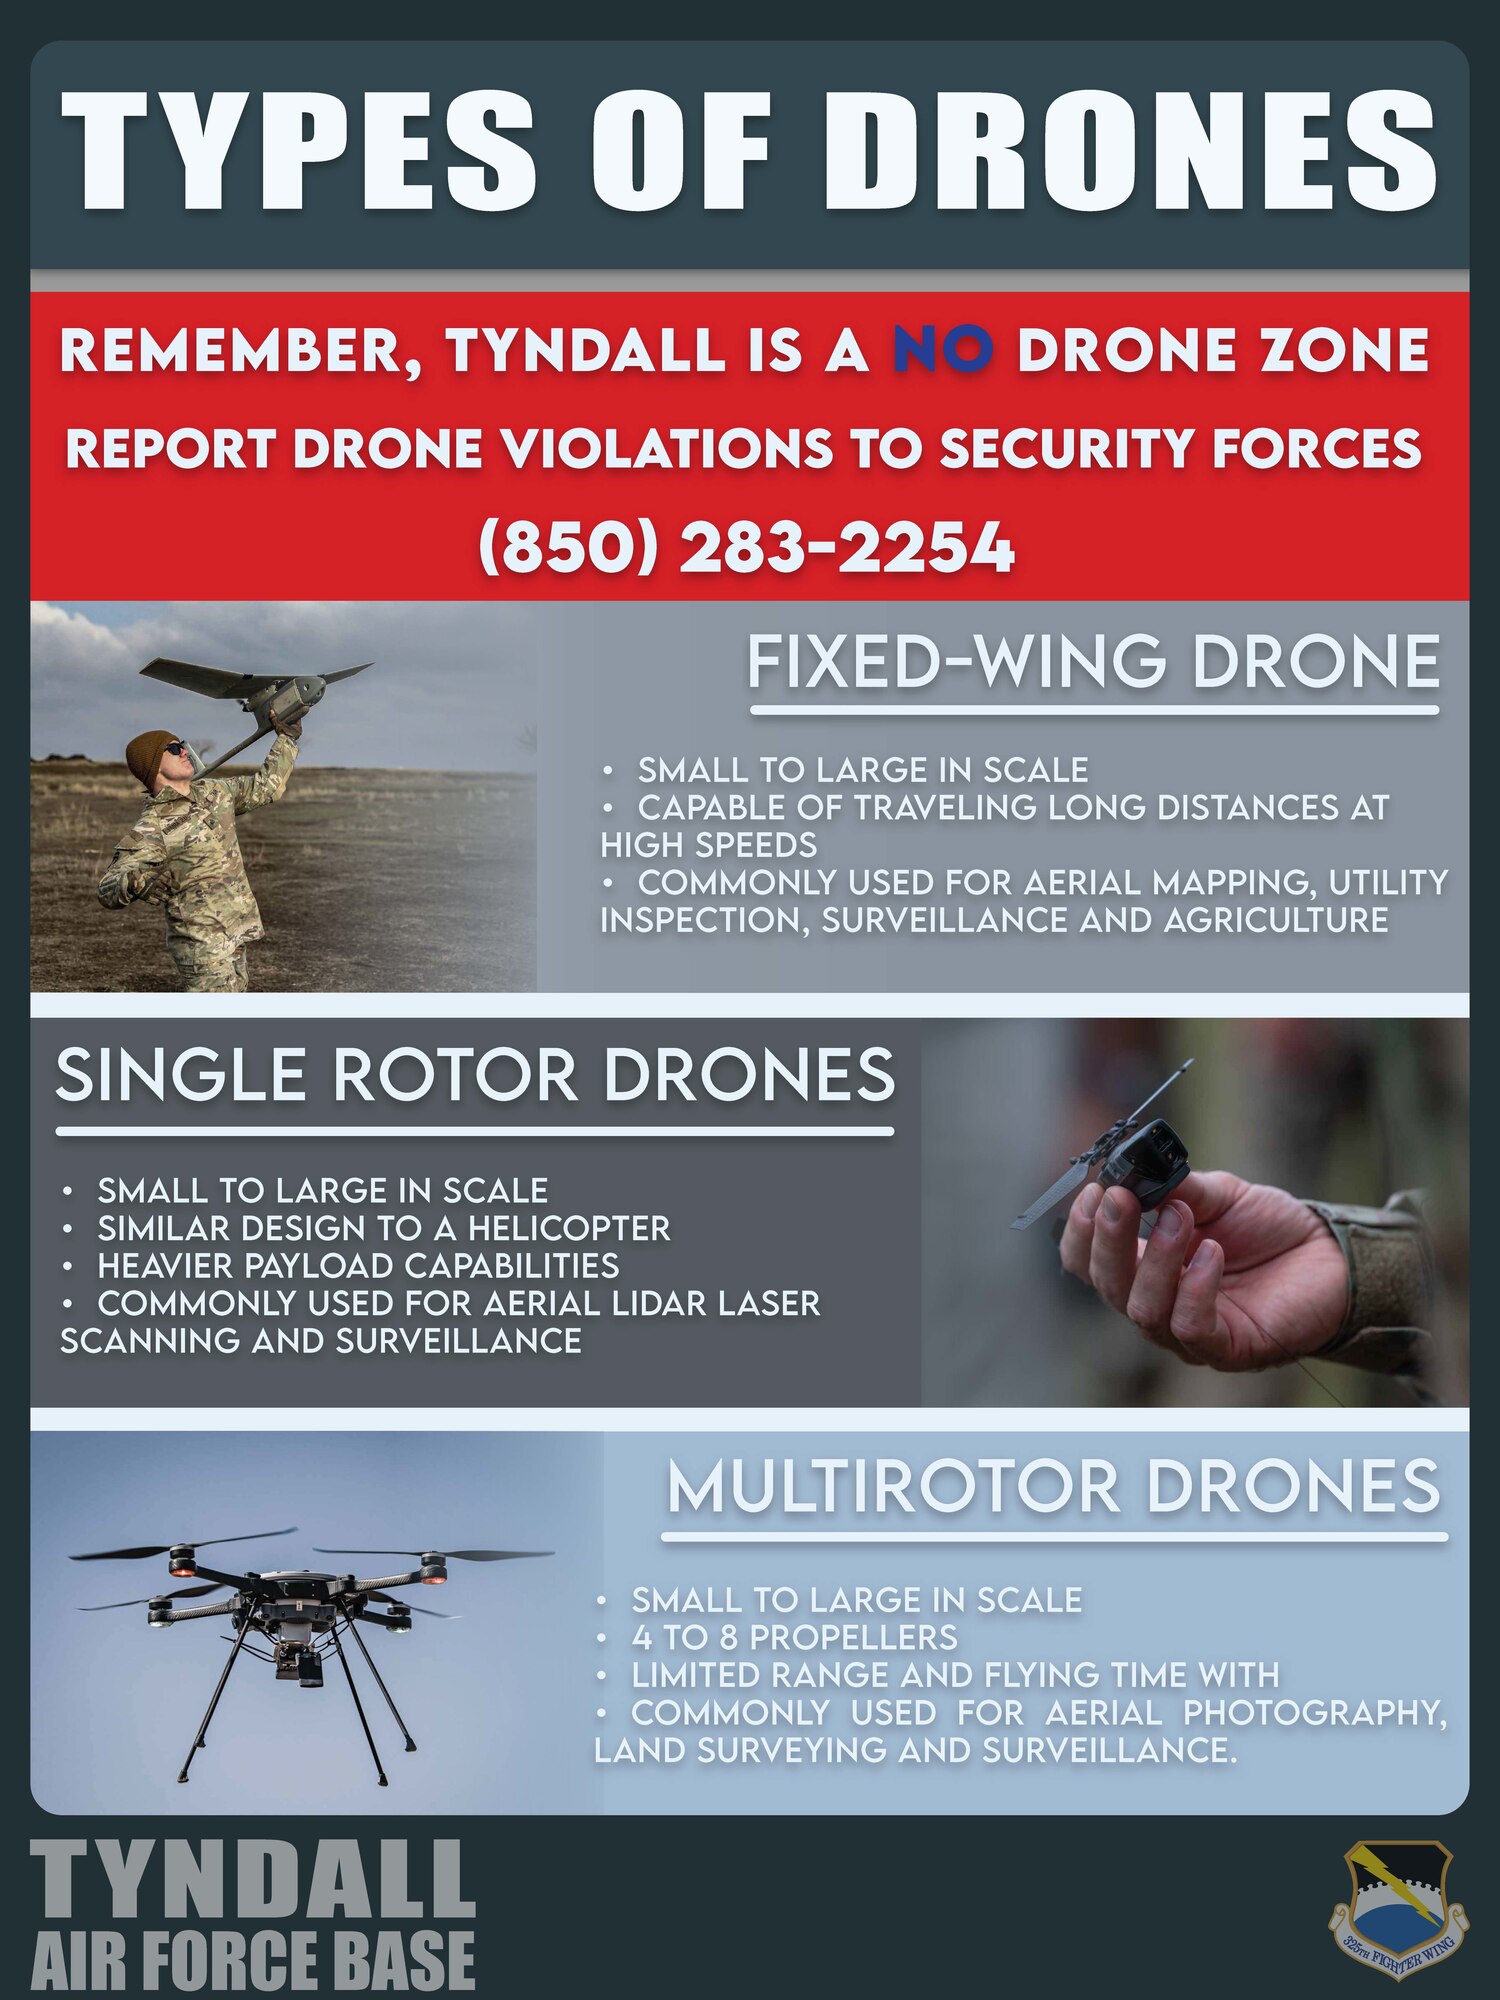 A graphic about how Tyndall is a no drone zone